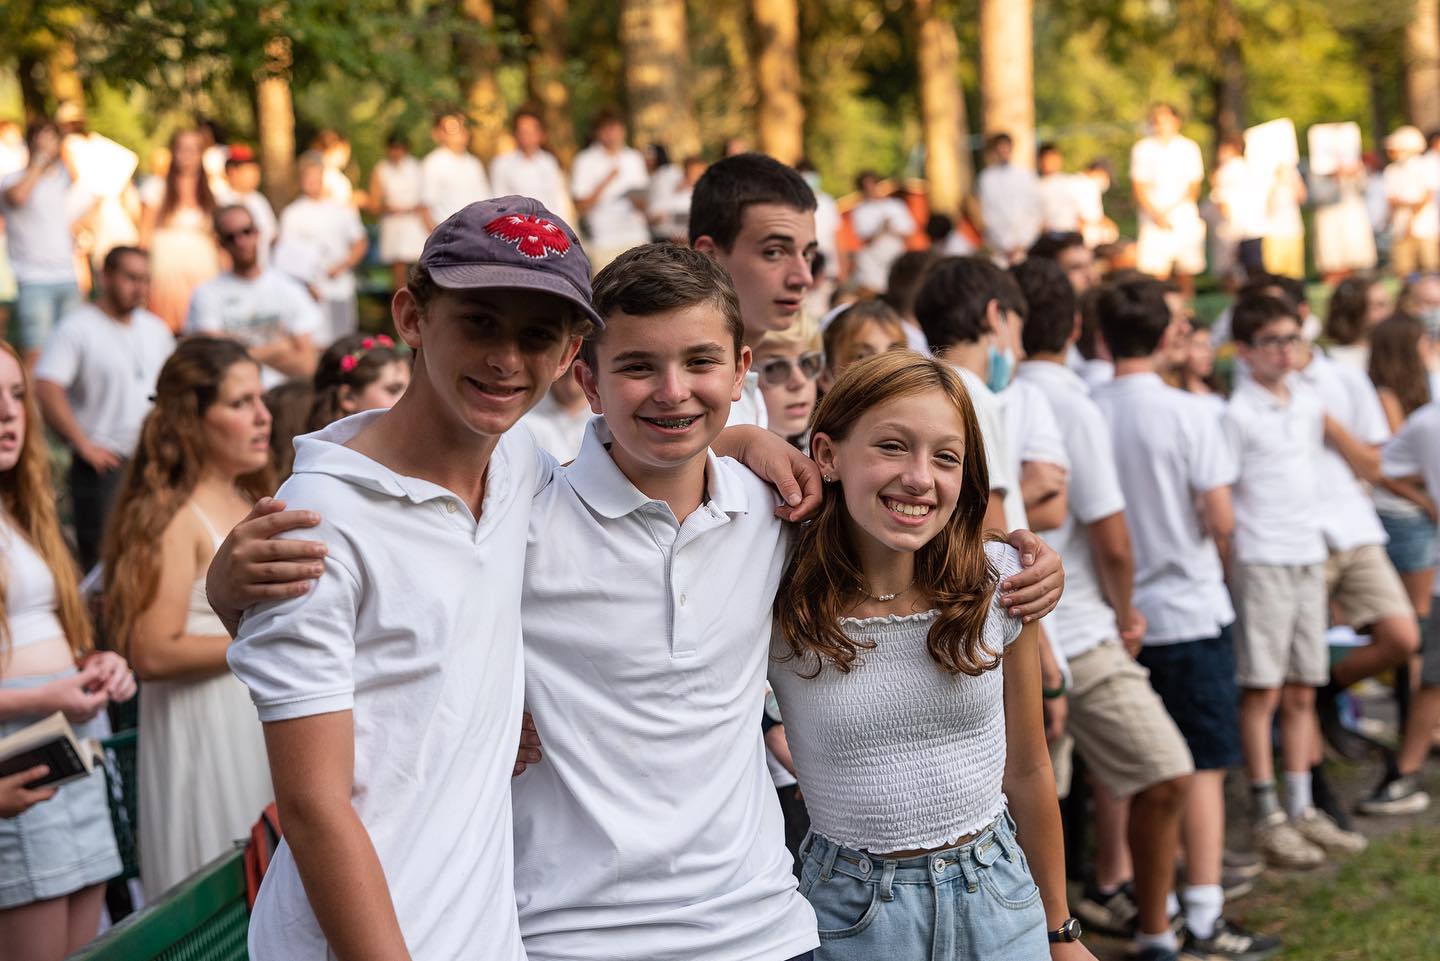 Shabbat Shalom to our entire Eisner Camp community! Counting down the days until we are back home. Only 163 days to go!